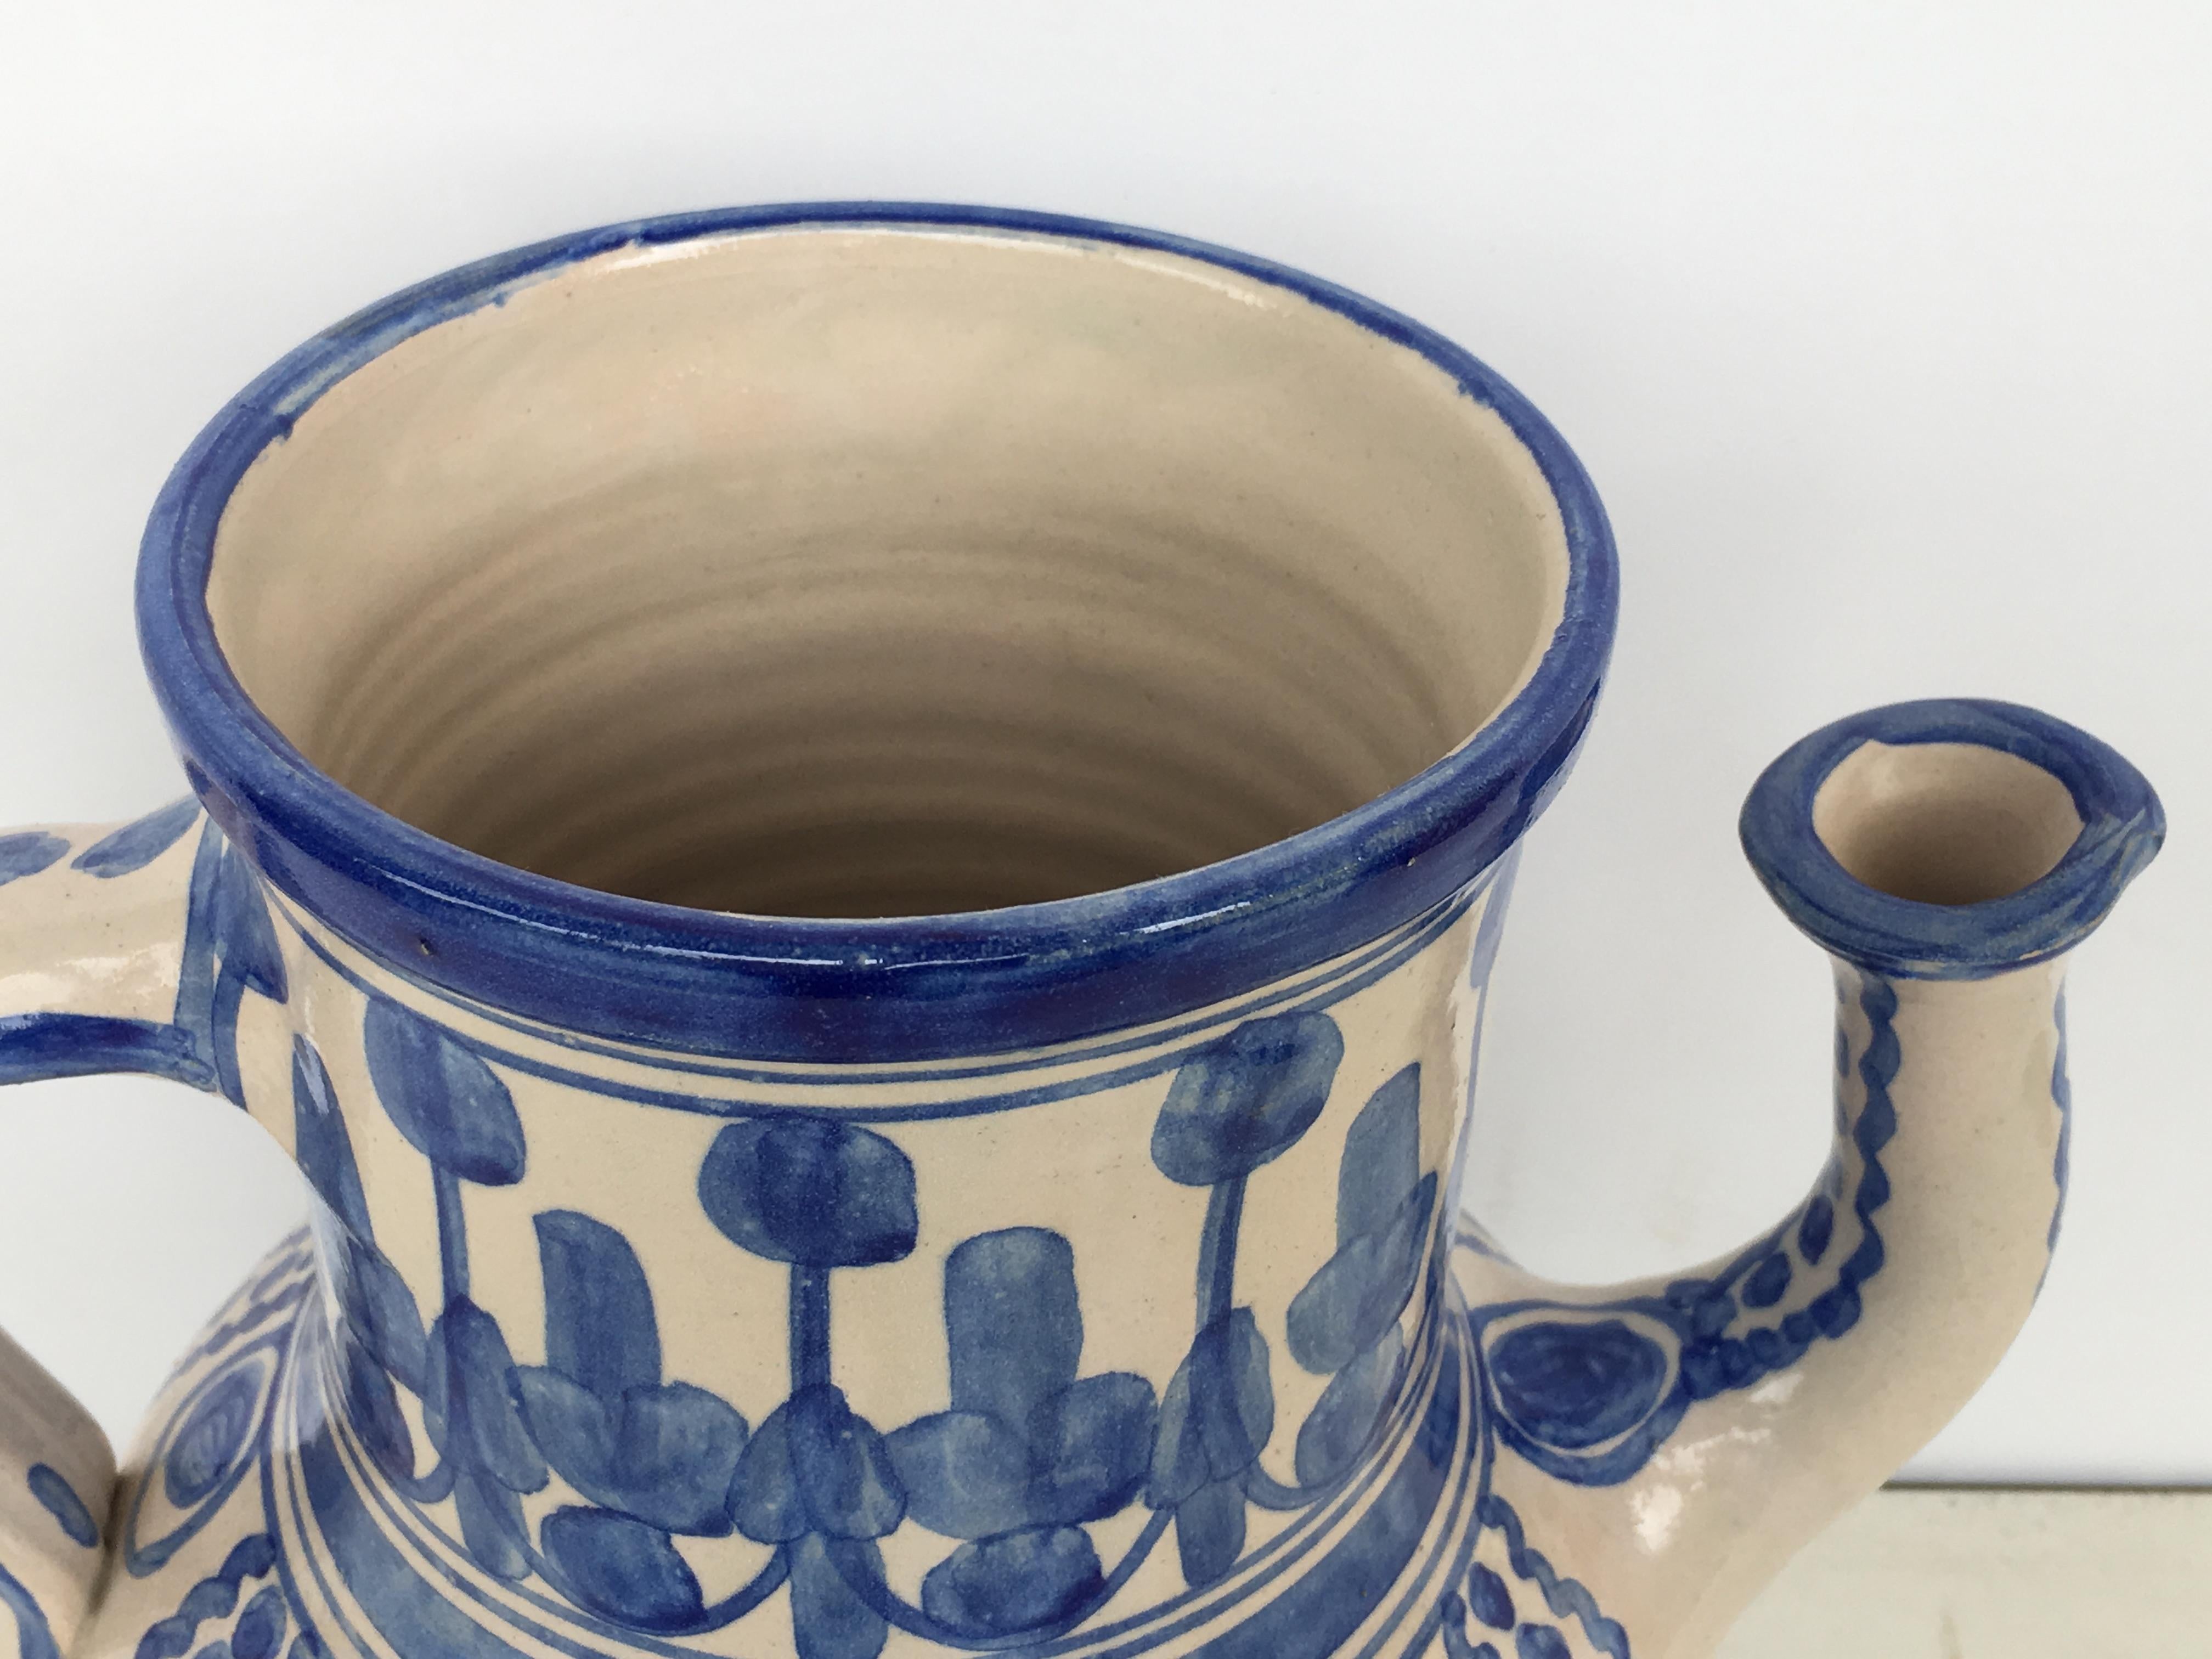 A striking Spanish glazed earthenware two-handled blue and white painted pitcher, the body underglaze ornamental blue decorated .

Talavera de la Reina pottery is a craft made in Talavera de la Reina, Toledo (Spain). Dishes, jars and other objects